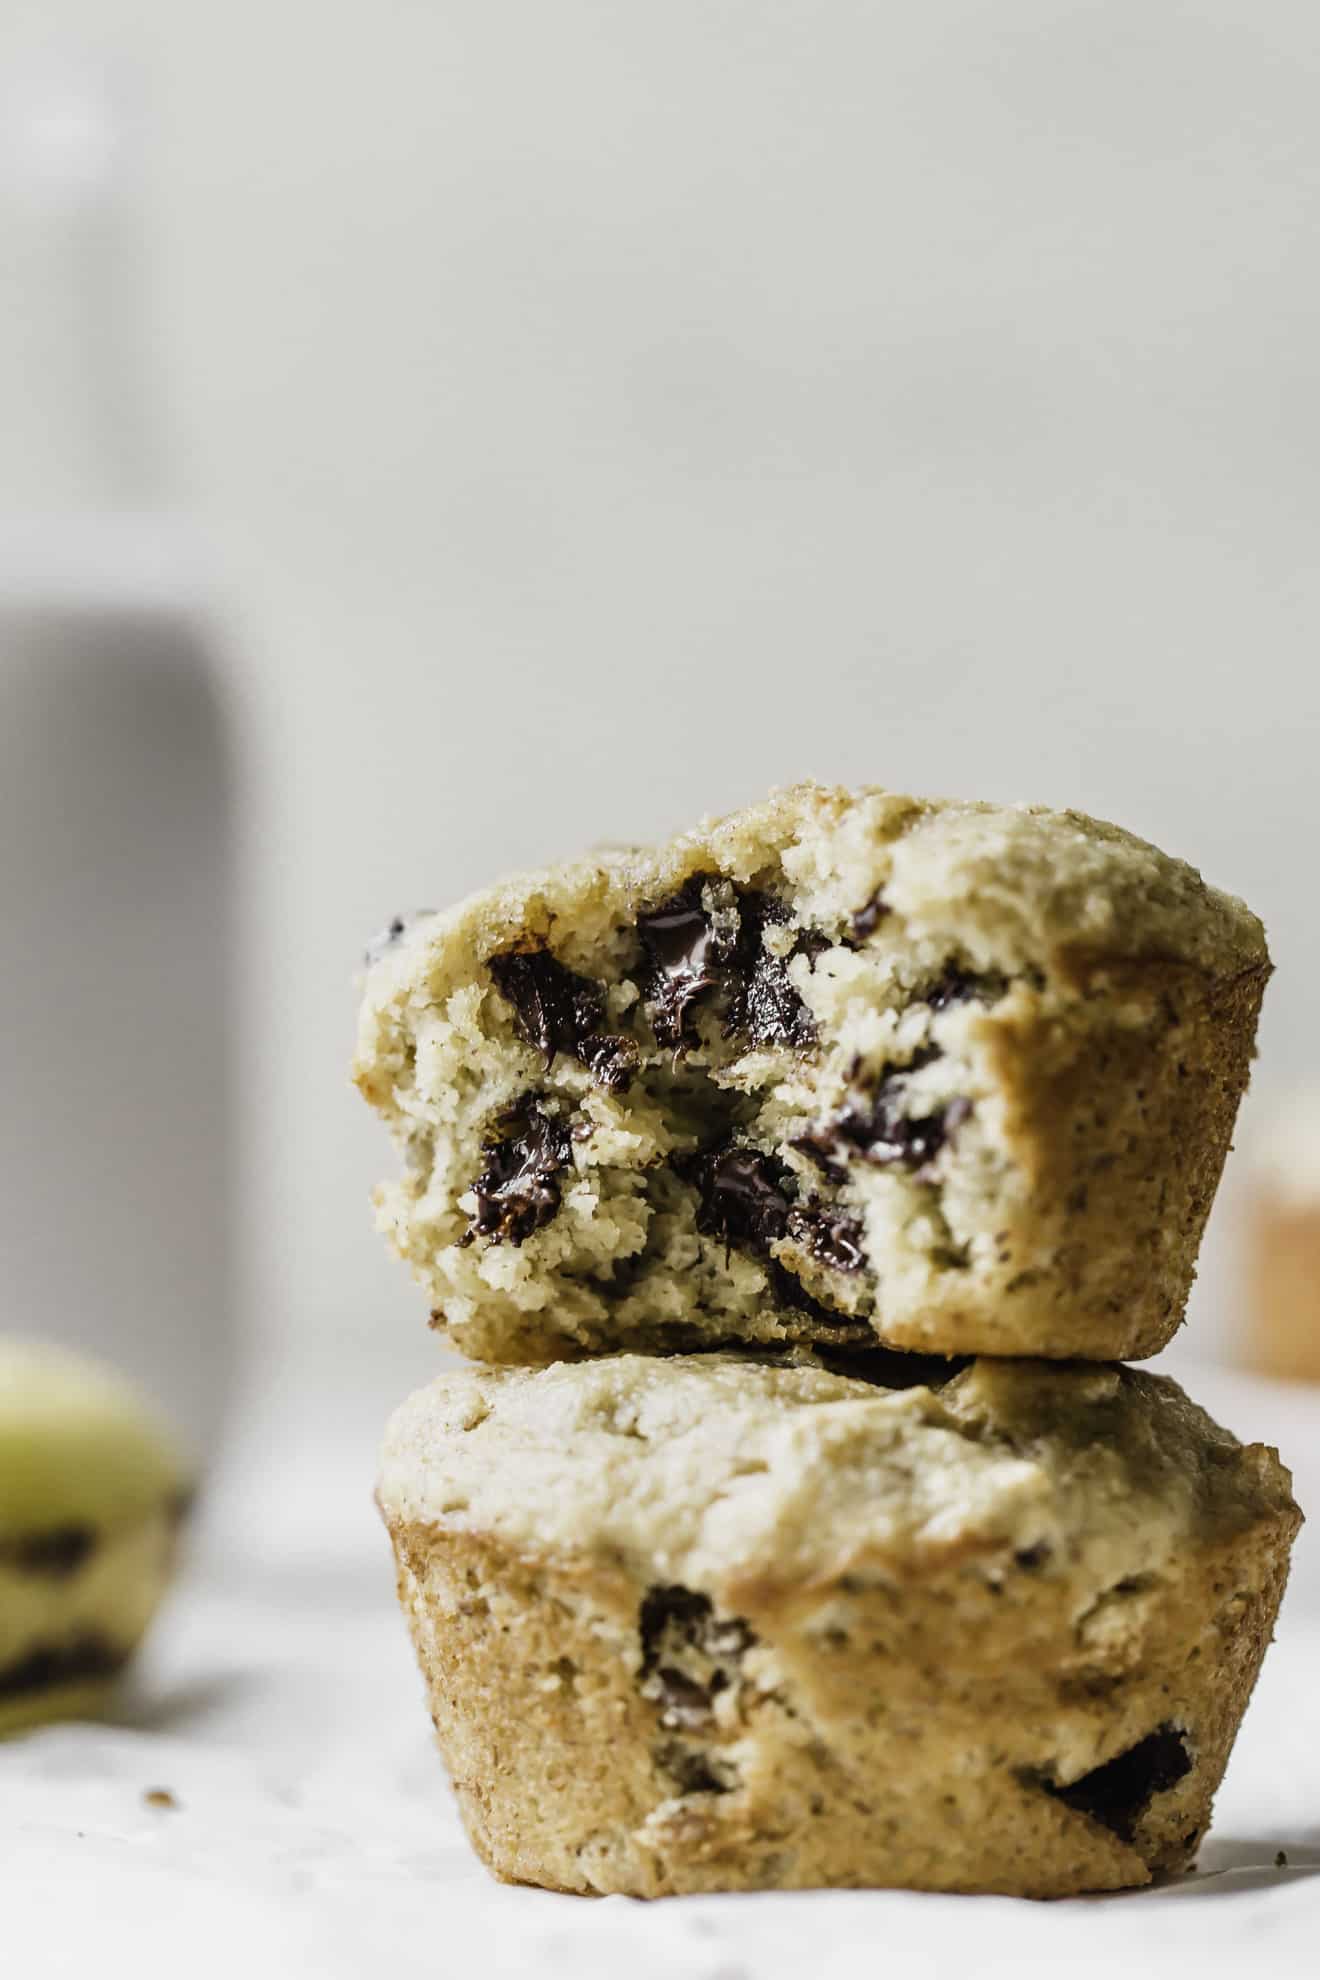 This is a side view of two banana muffins stacked on top of each other. The top muffin has a bite taken out revealing melty chocolate chips. The muffins sit on a white surface with a banana blurred in the background. 